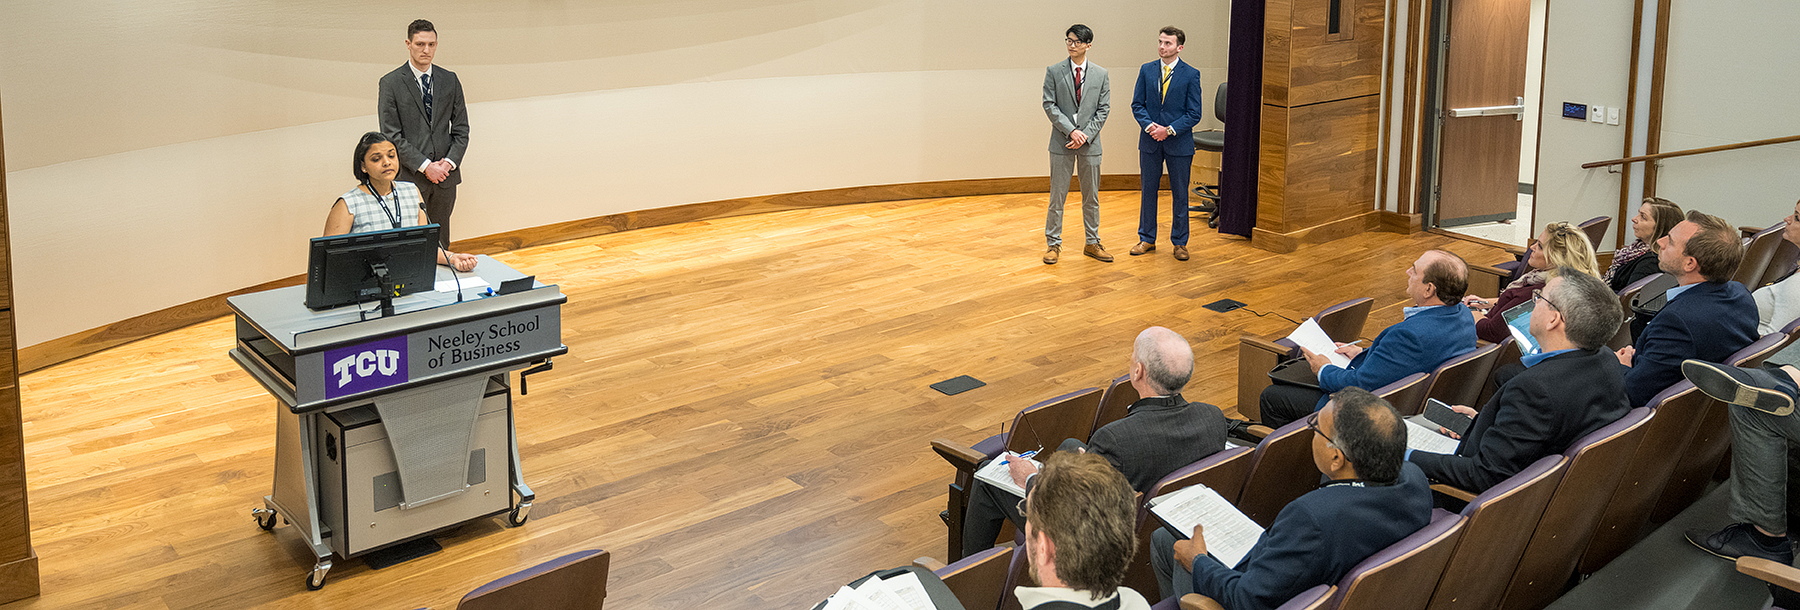 Section Image: Team Presenting in Shaddock Auditorium 